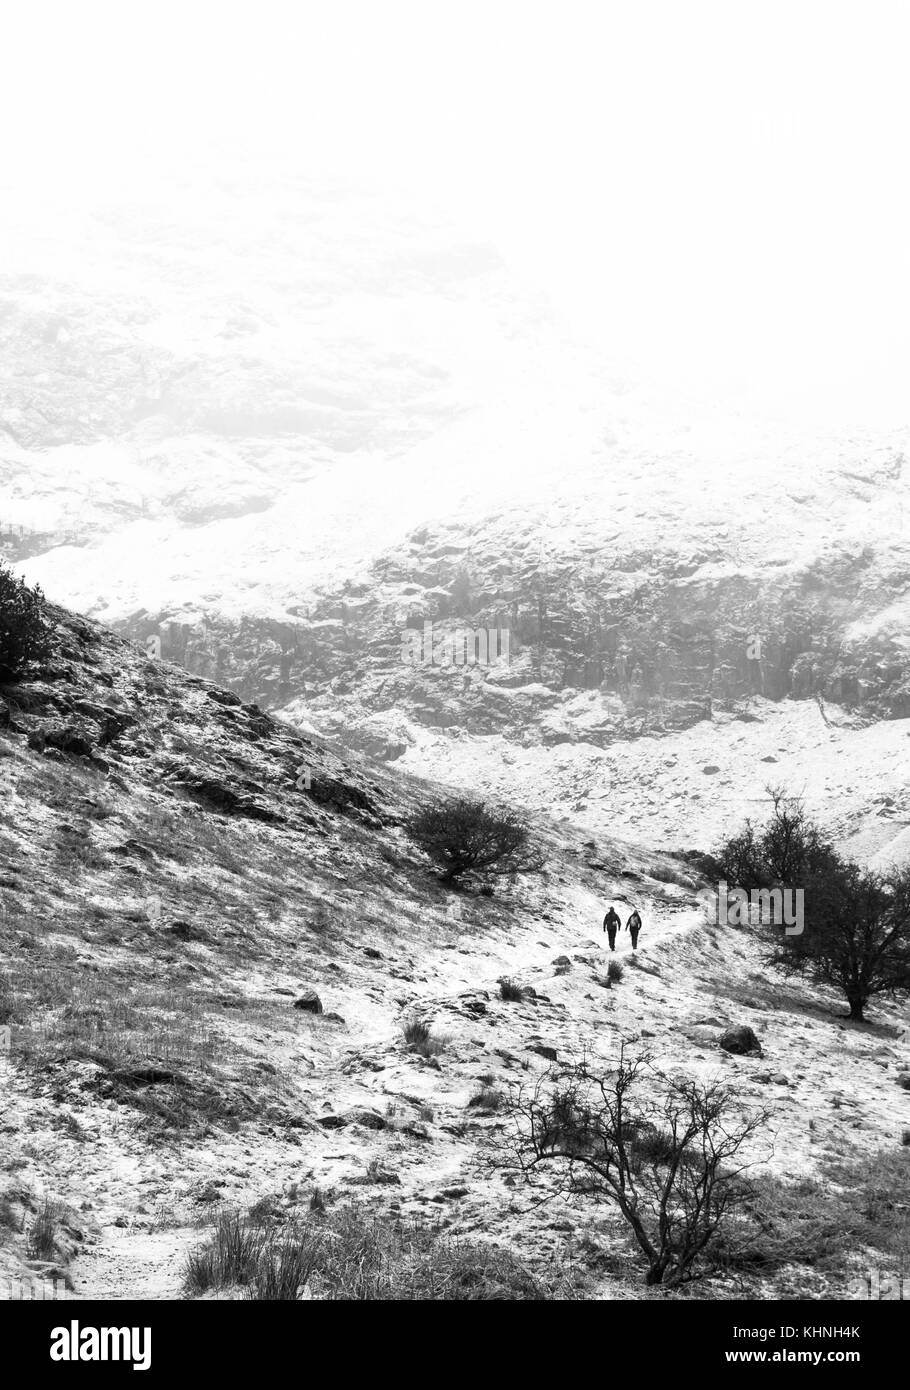 A black and white photo of a couple going up a snow-covered mountain following a track past little trees. Shot on the Old man of Contiston in Cumbria. Stock Photo